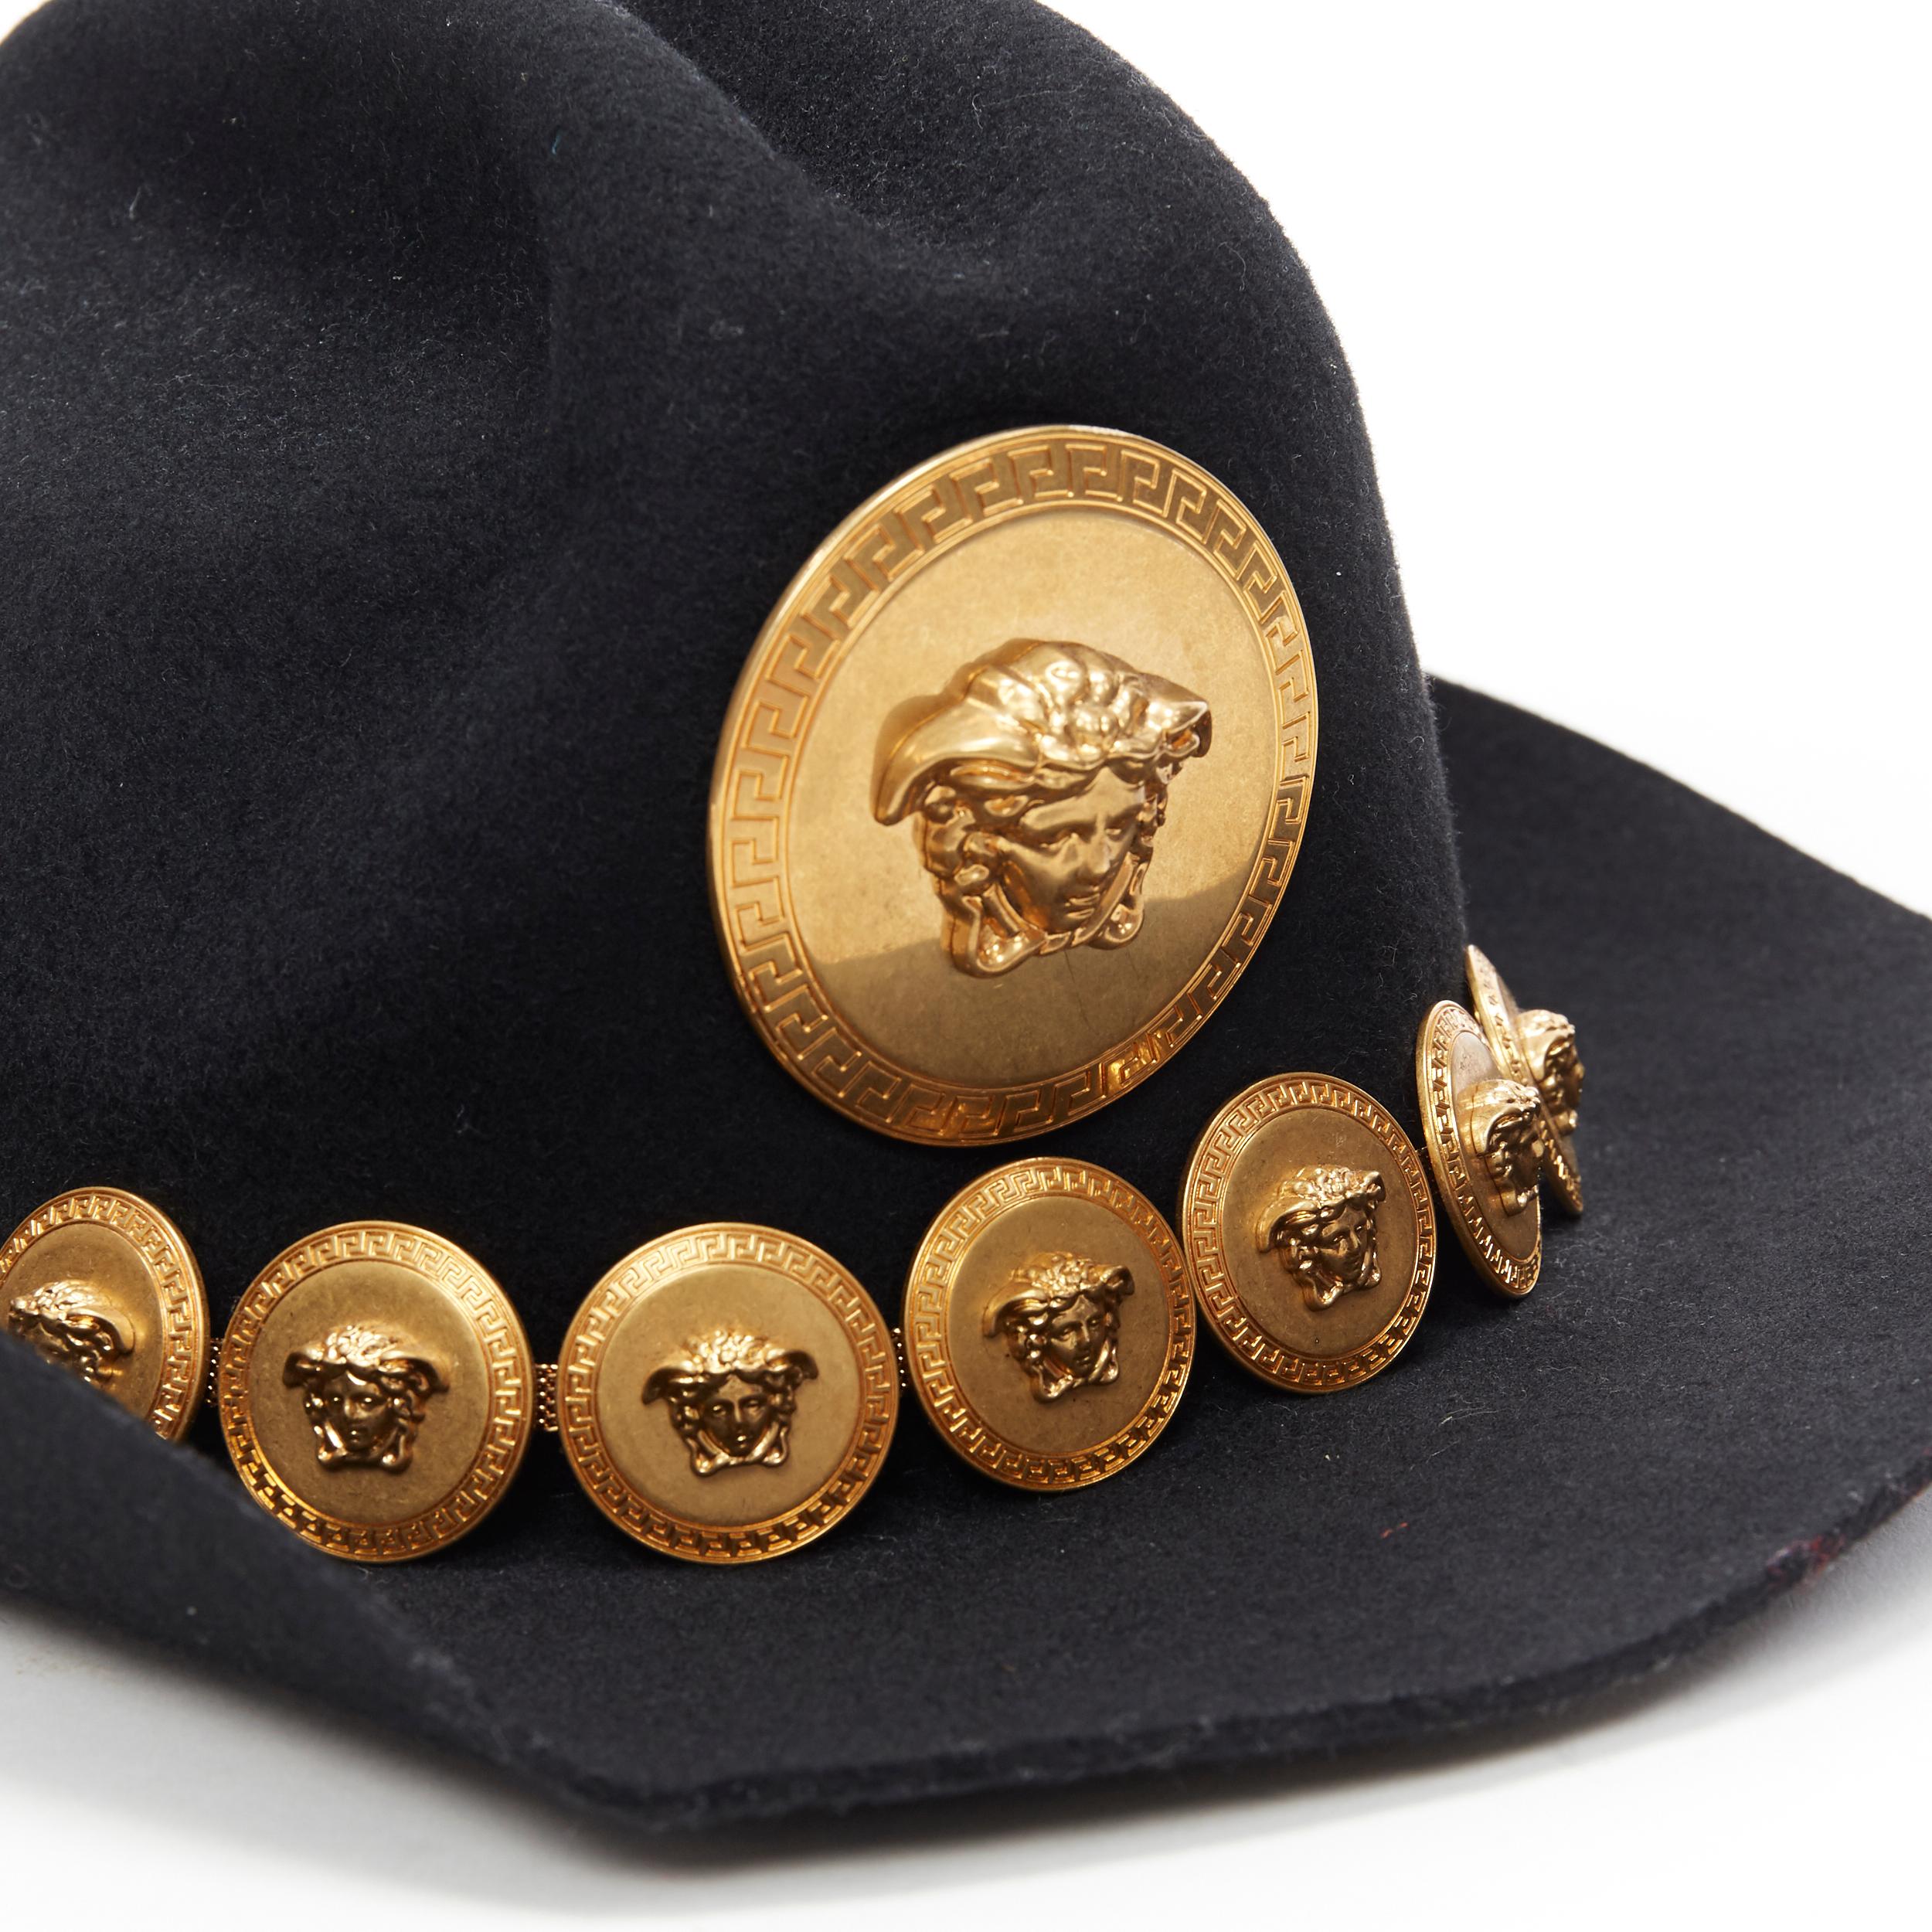 new VERSACE SS18 Tribute Runway black wool felt gold Medusa coin cowboy hat
Brand: Versace
Designer: Donatella Versace
Collection: Spring Summer 2018
Model Name / Style: Medusa cowboy hat
Material: Wool
Color: Black
Pattern: Solid
Extra Detail: